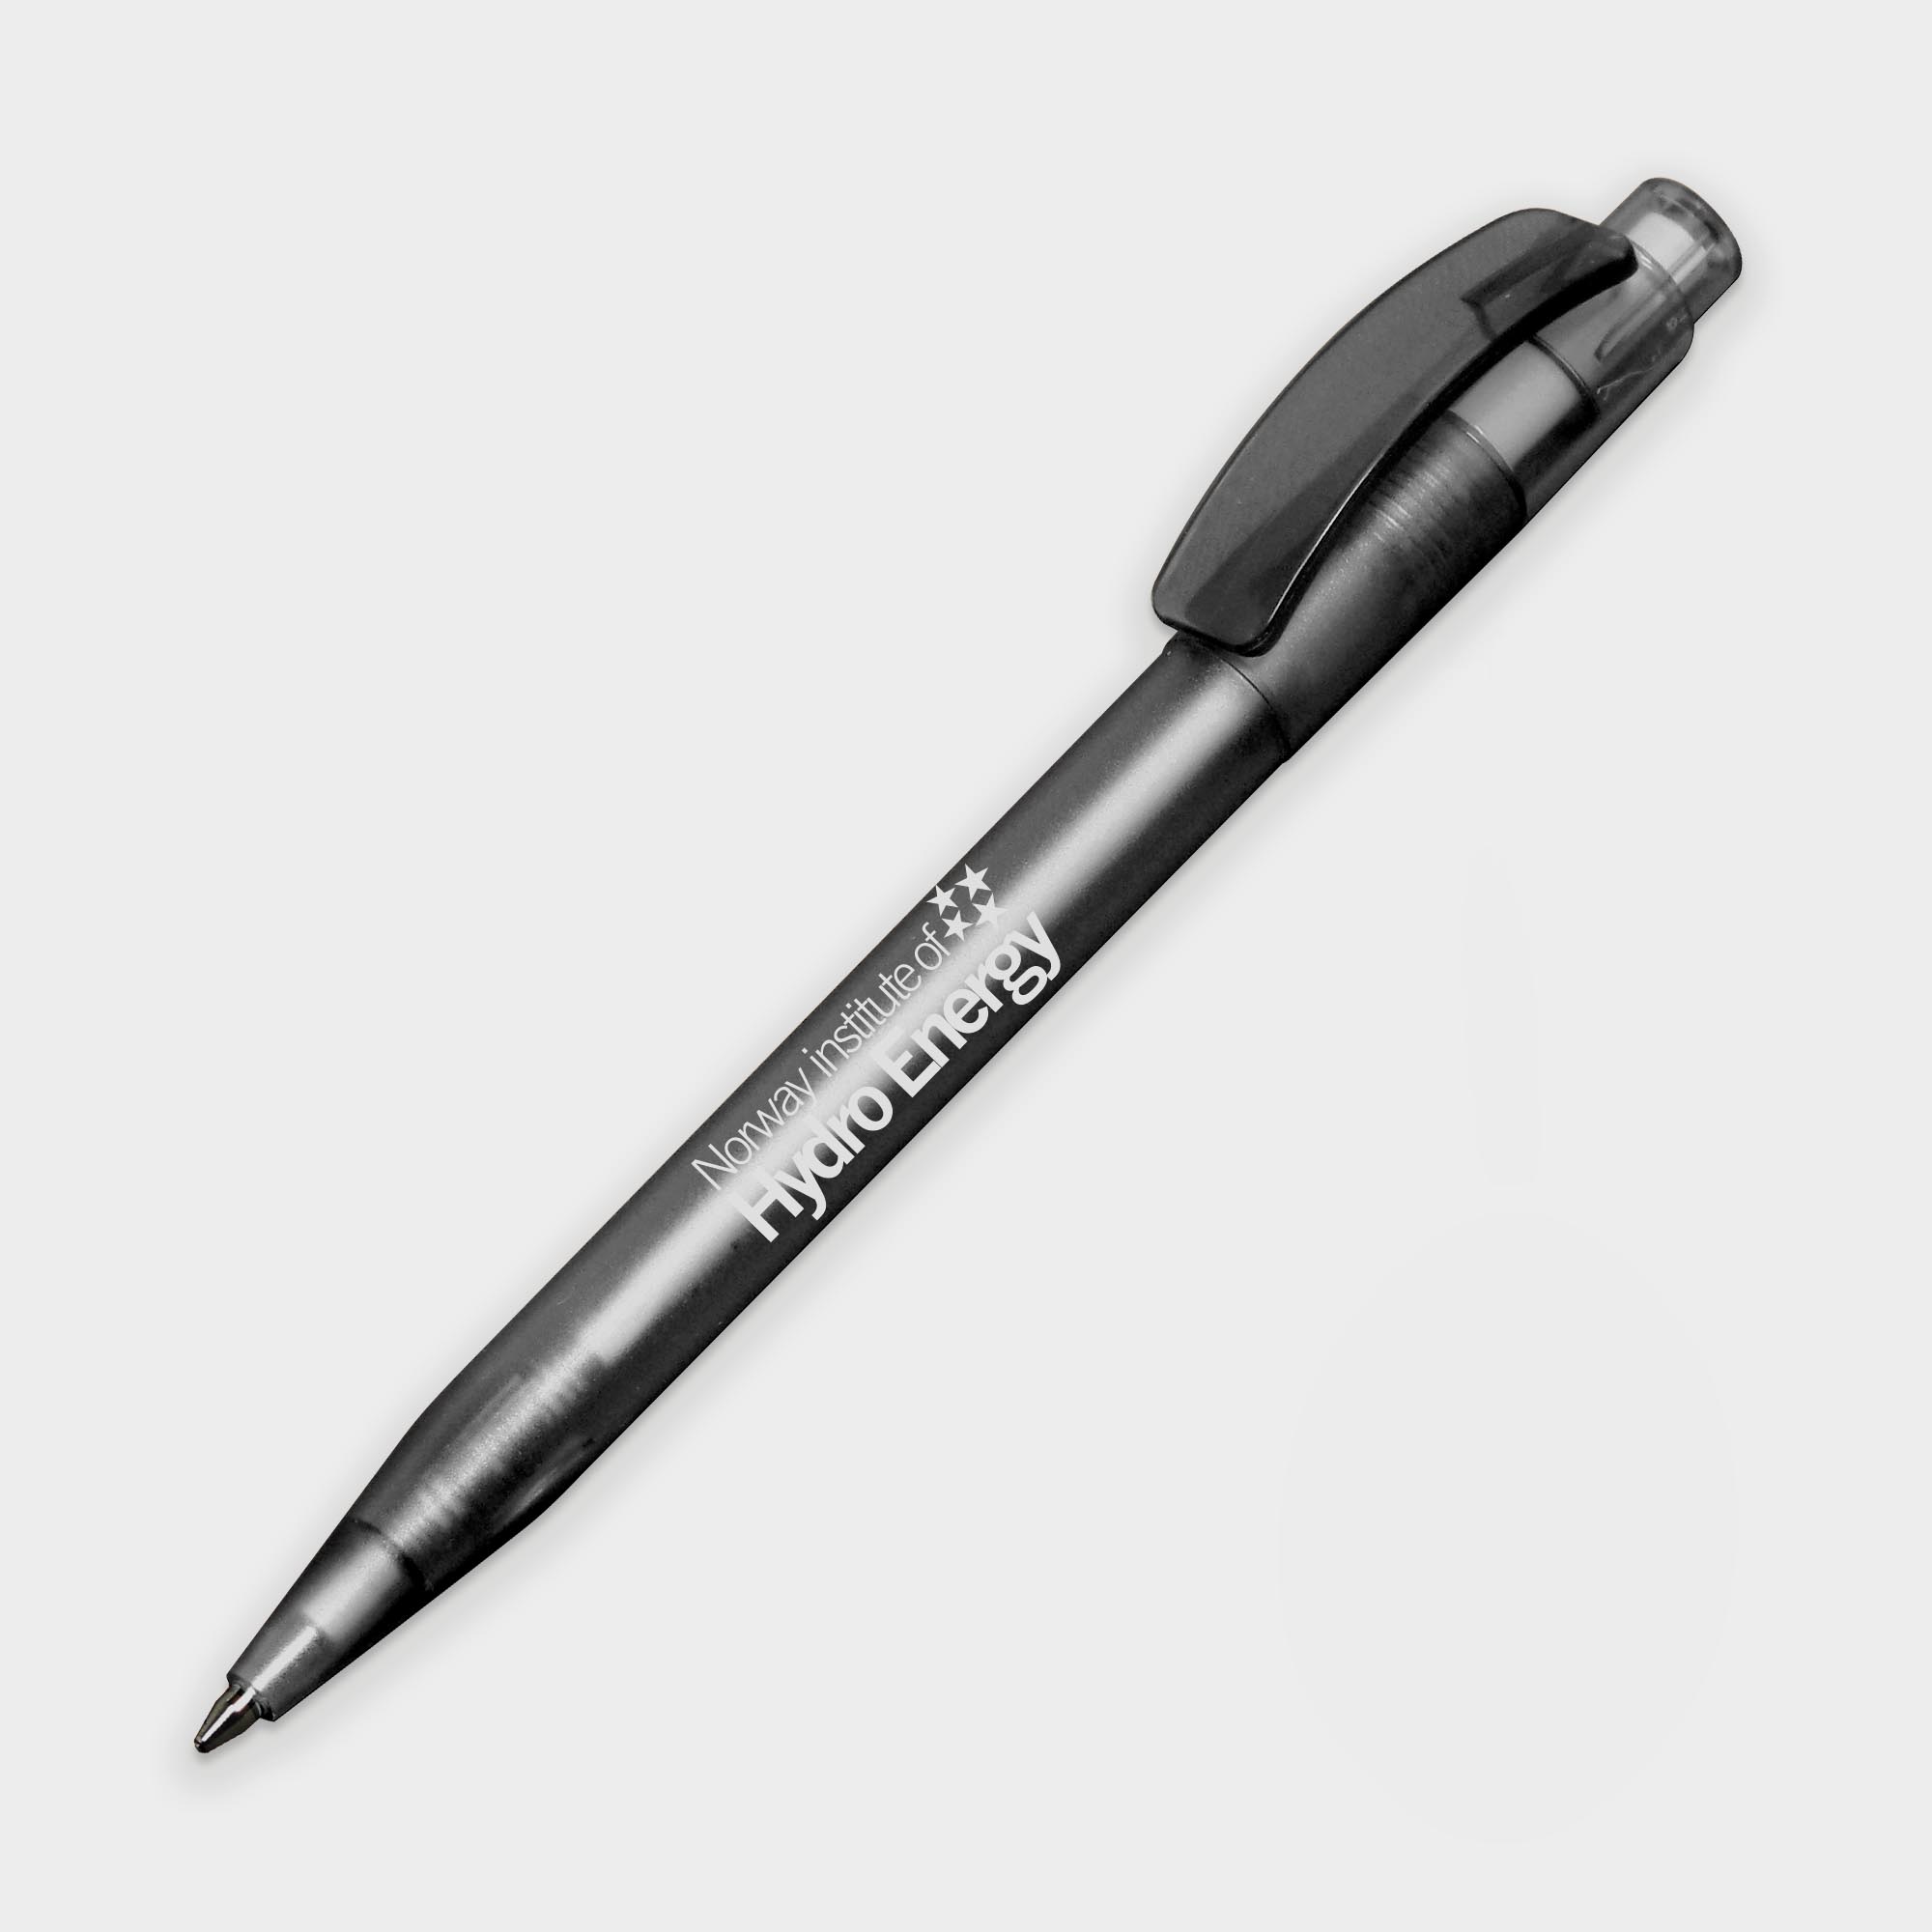 The Green & Good Indus Pen made from biodegradable plastic. Push button pen in a variety of colours. Black ink as standard. Black